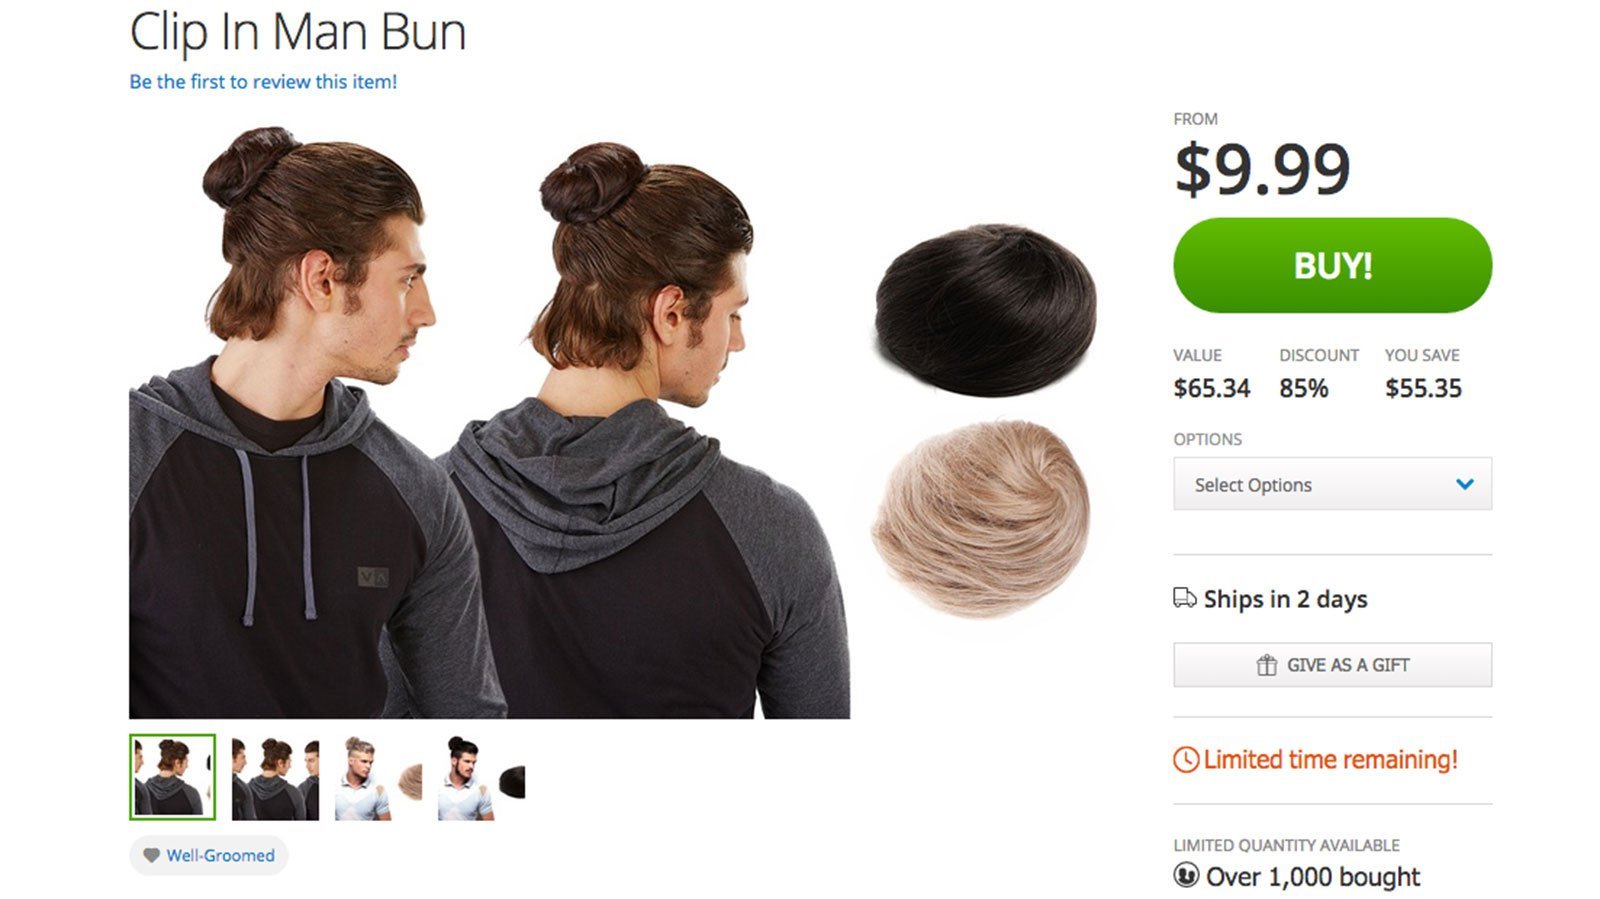 Groupon is selling a perfect solution for any adventurous guy who wants to test out the man bun trend, but doesn't want to put in the effort to grow out his hair.